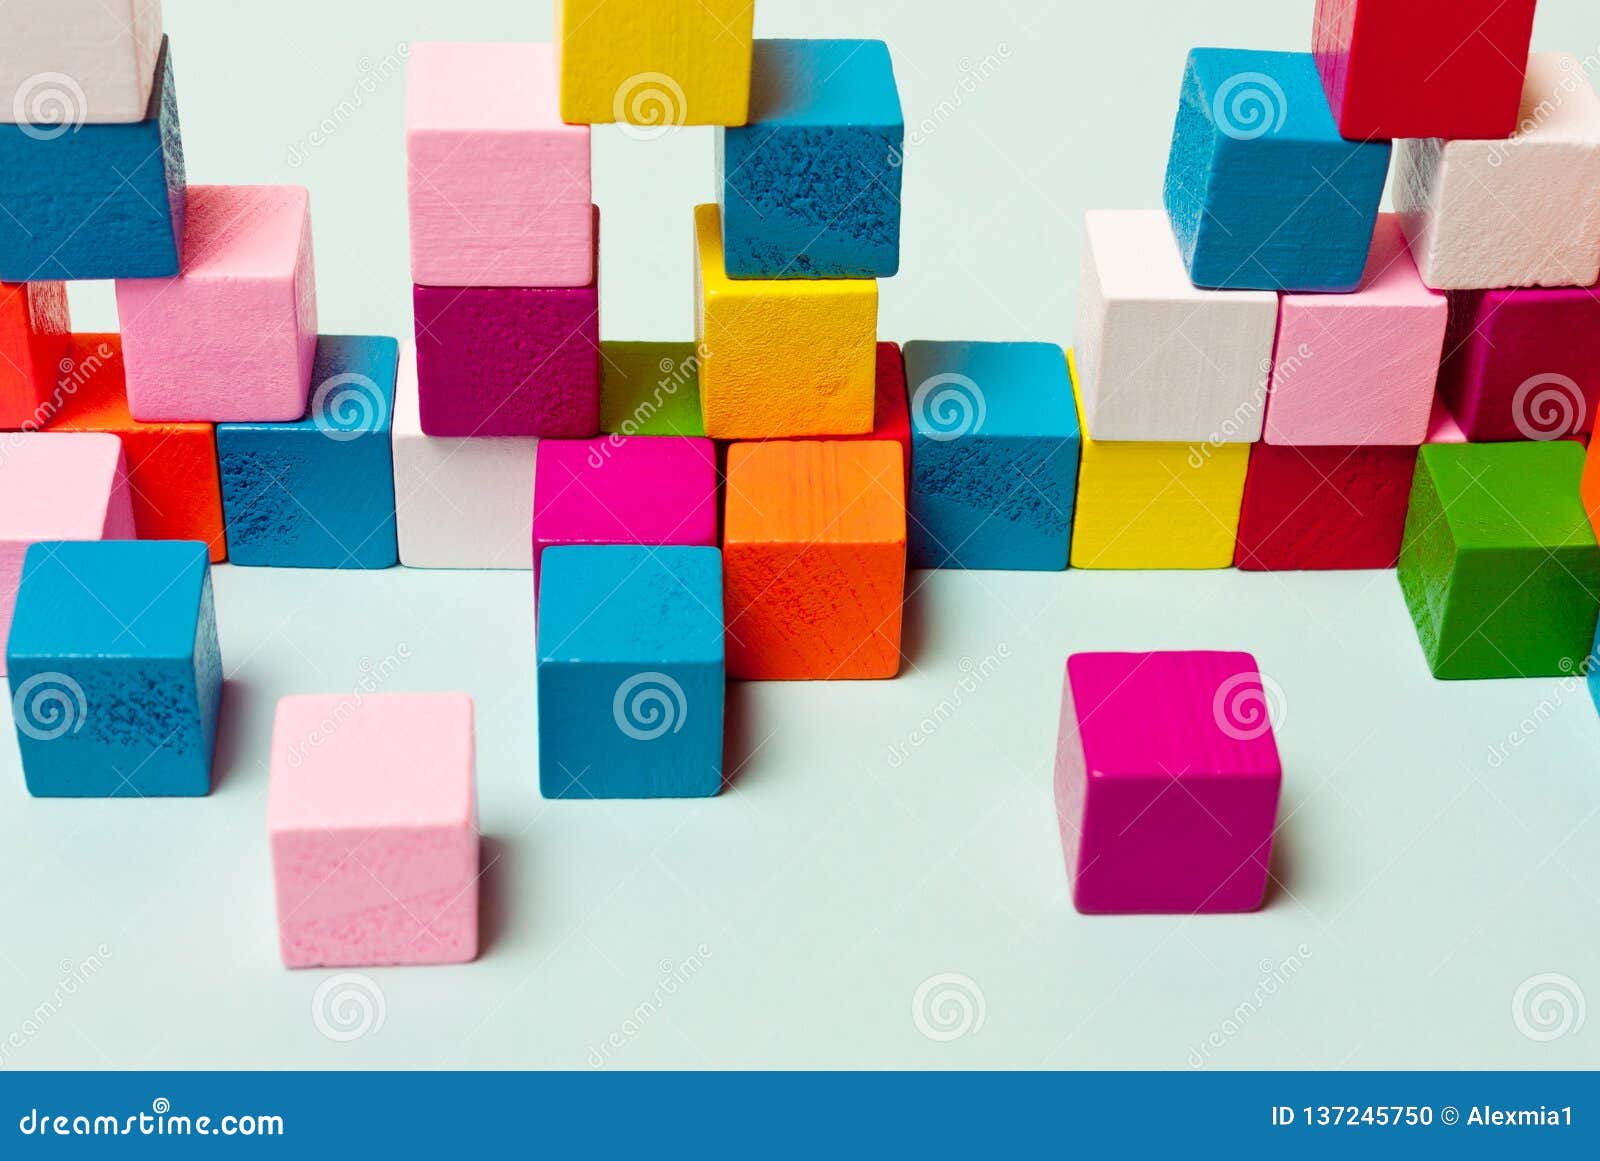 Color Cubes In The System, The Game, Puzzles. Concept Of Logical ...